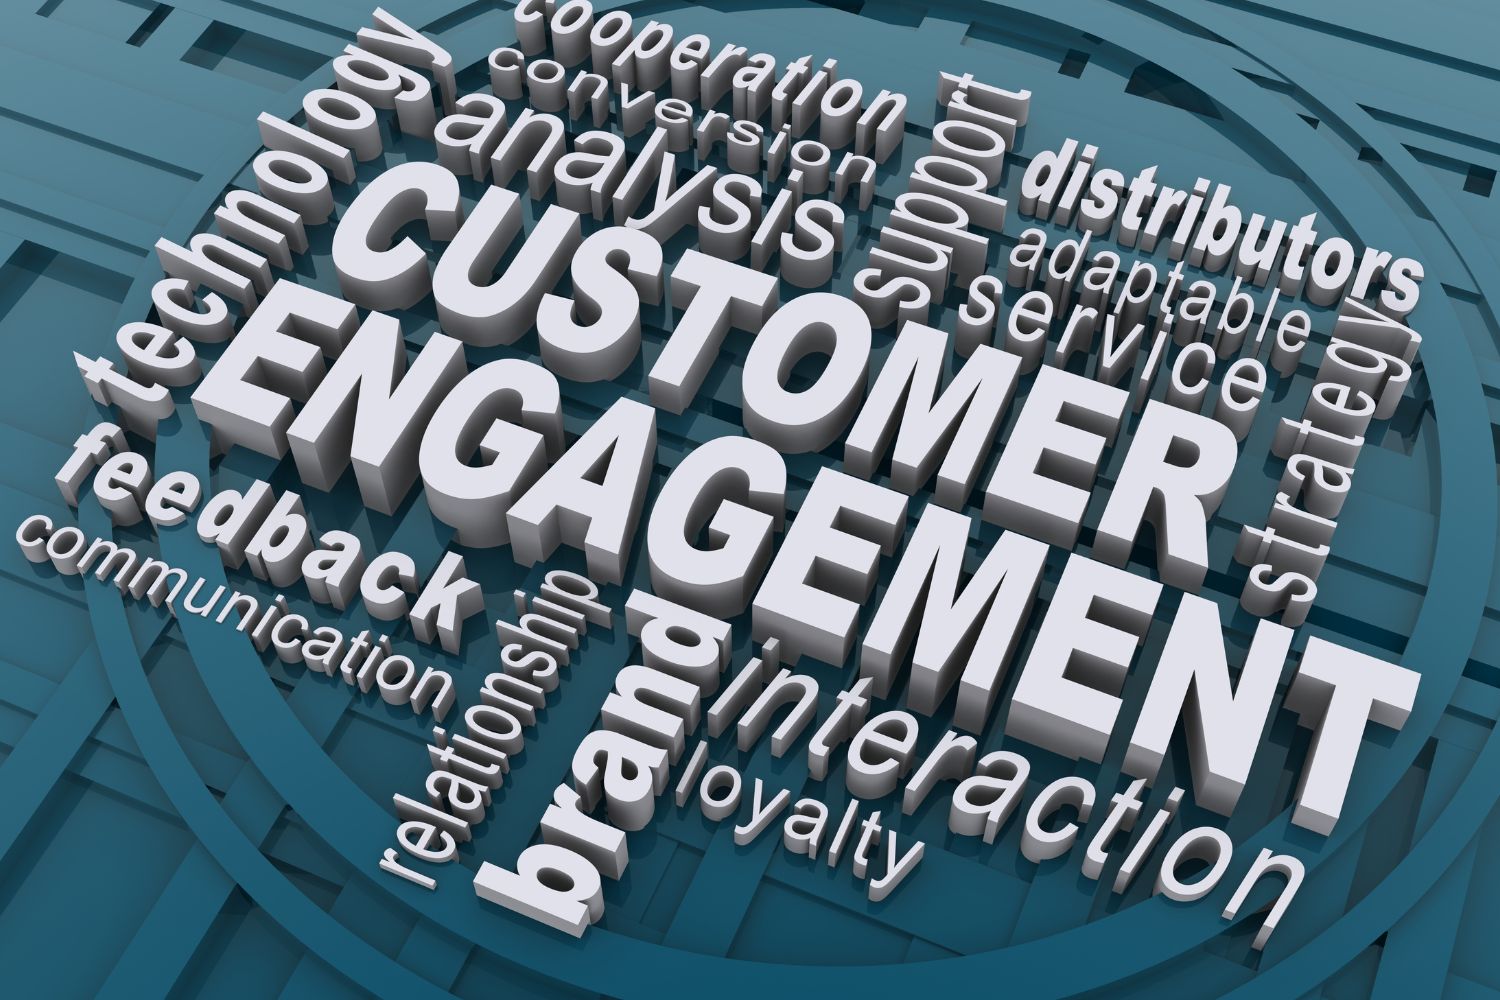 Online business provides better customer engagement and interaction